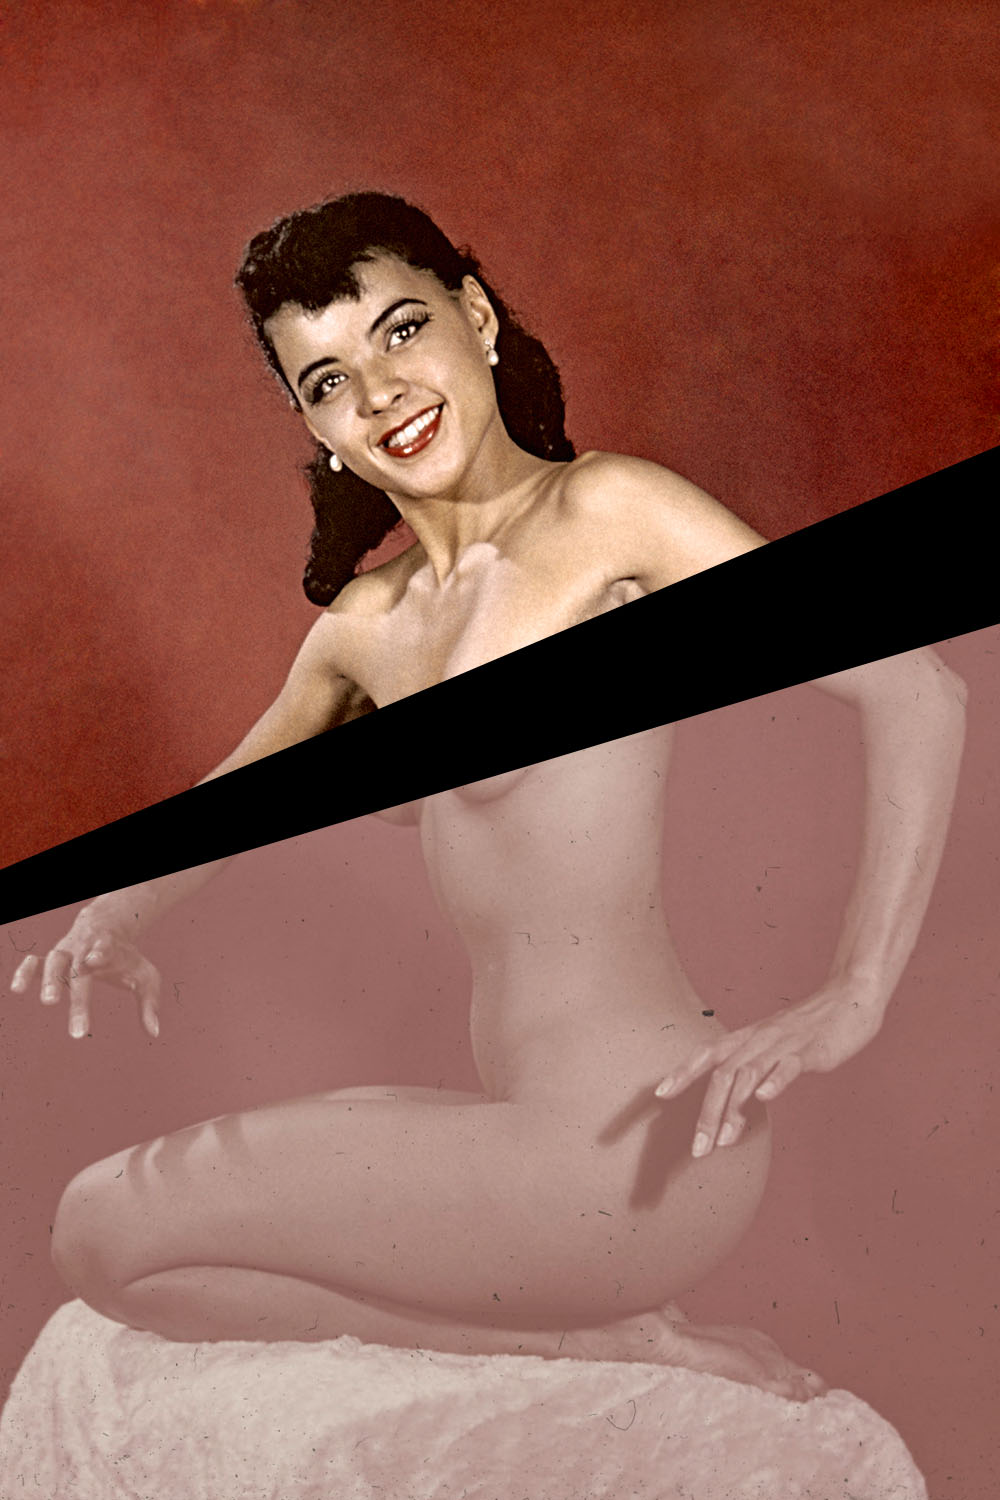 50s Pinup Porn - Nude Women of the 1950s - Restoring Pinups, Not Pornography